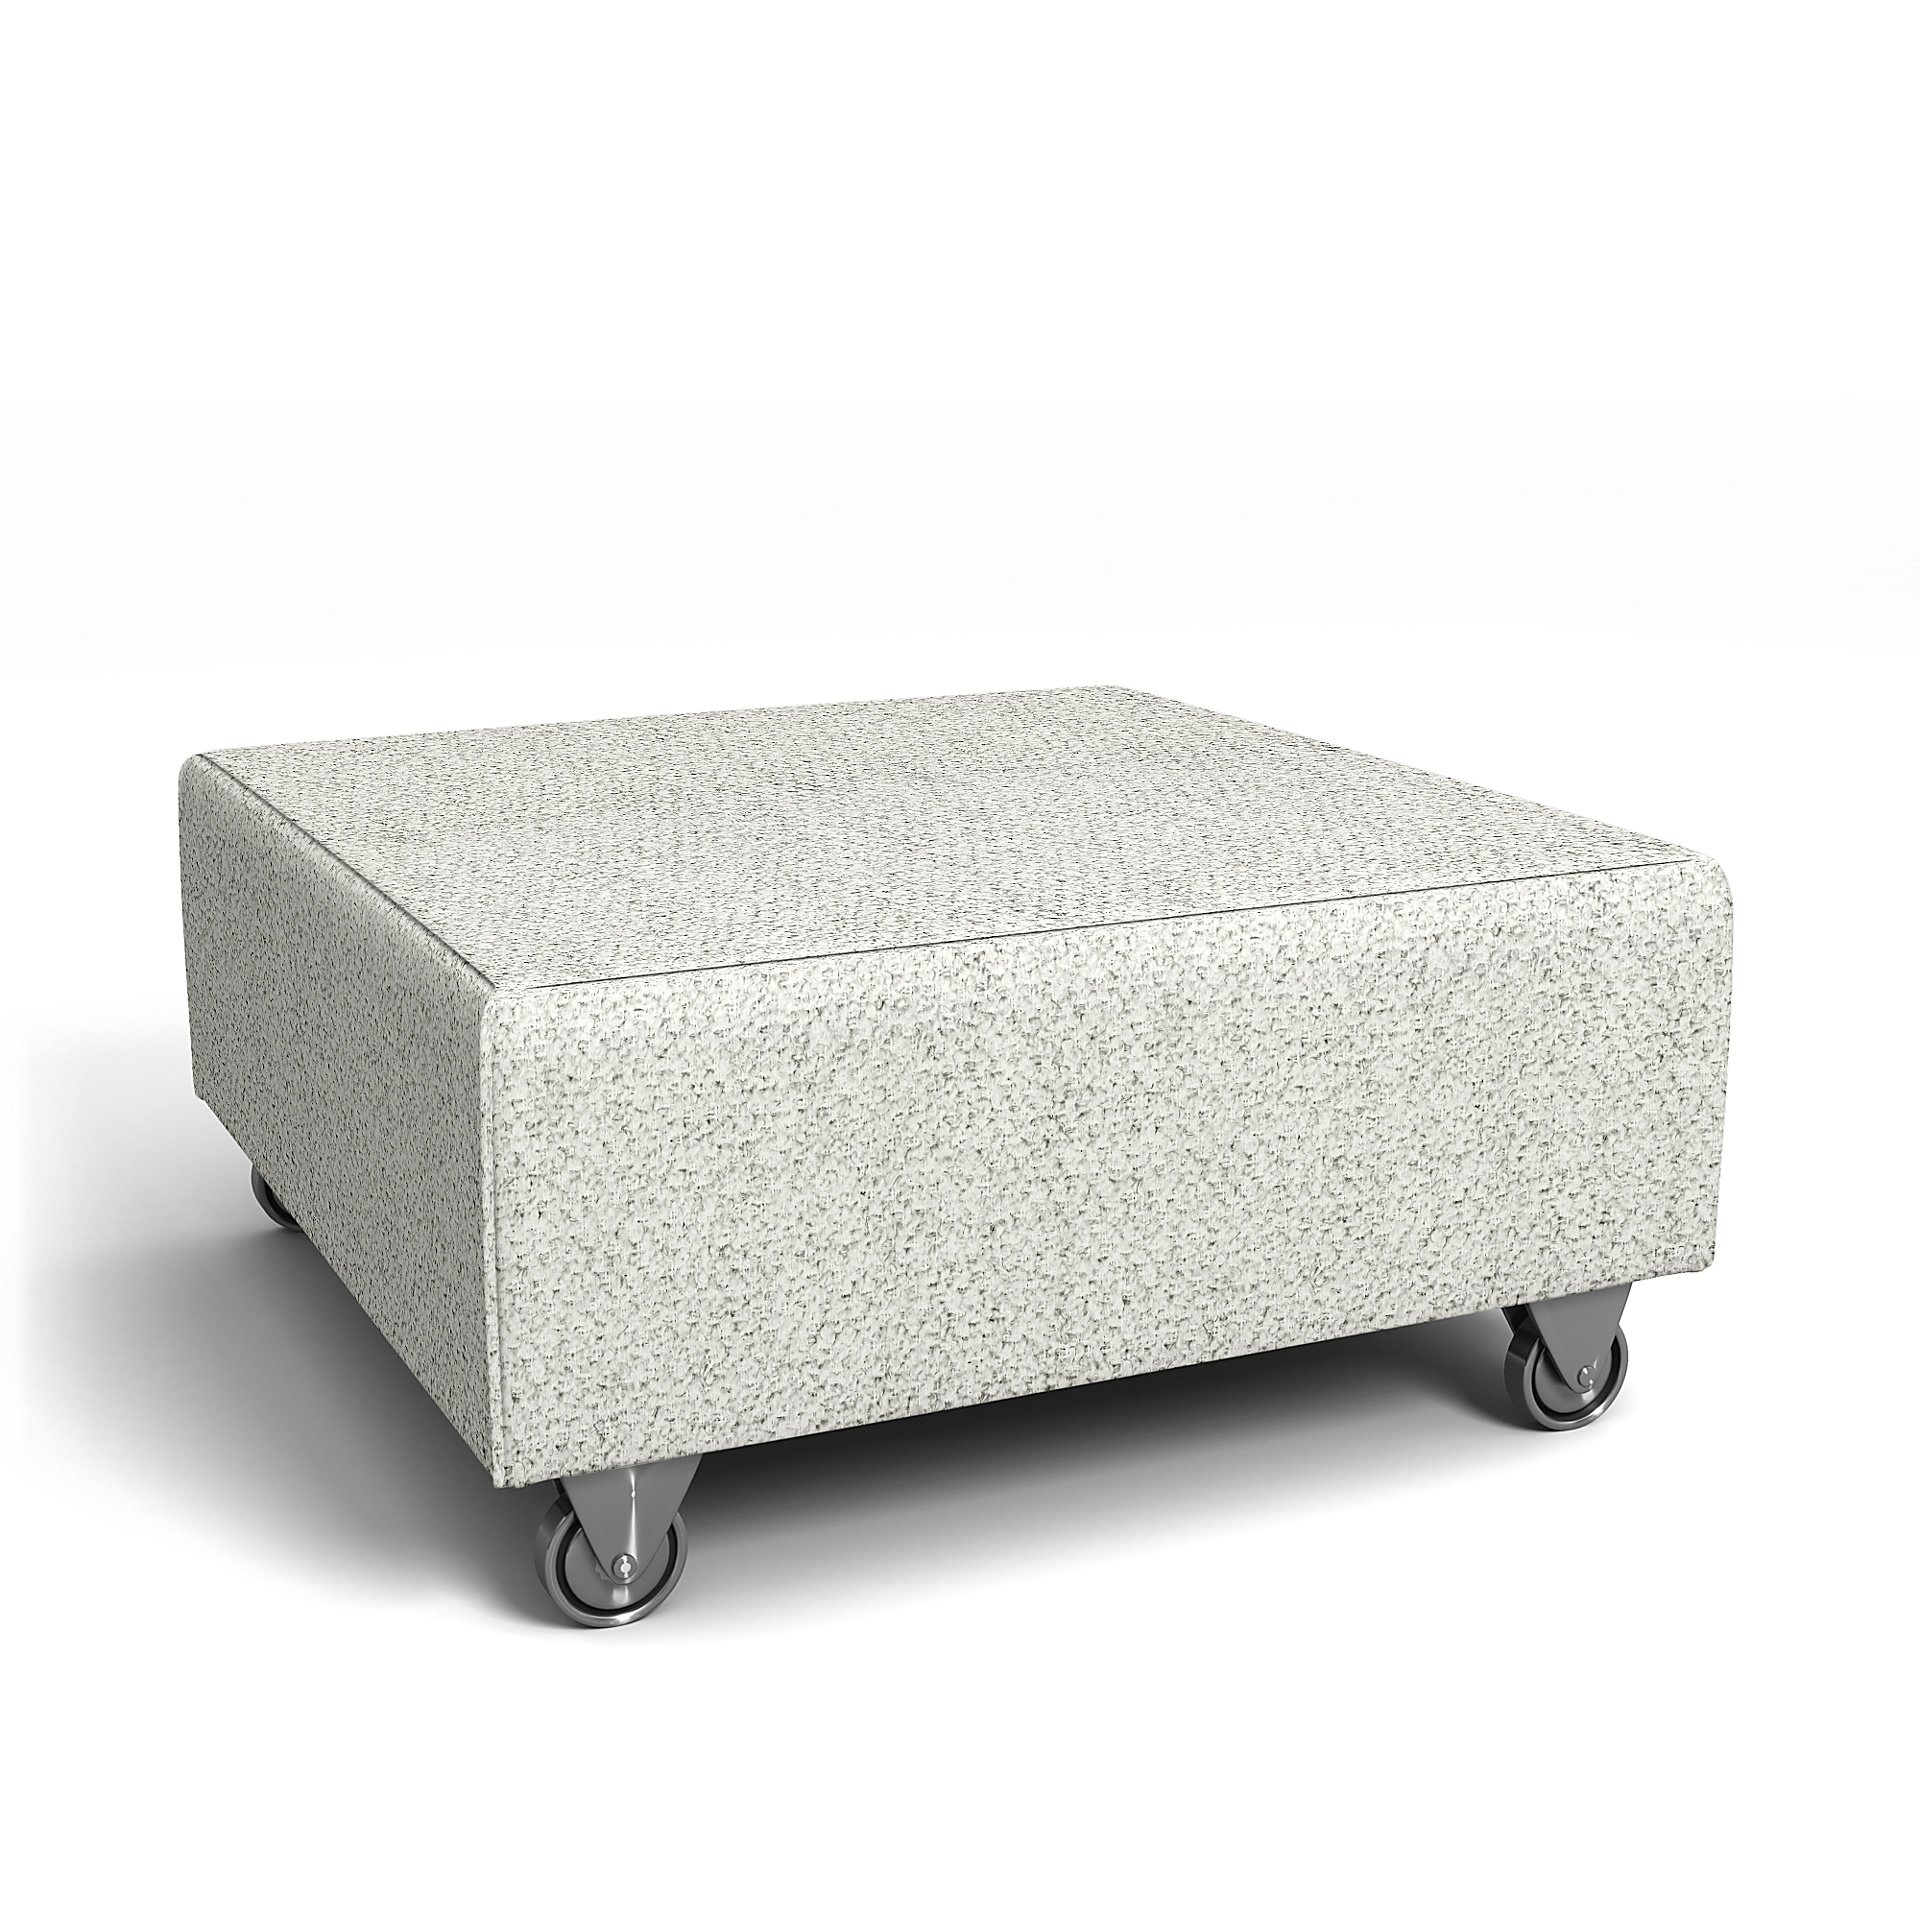 IKEA - Falsterbo Footstool Cover, Ivory, Boucle & Texture - Bemz